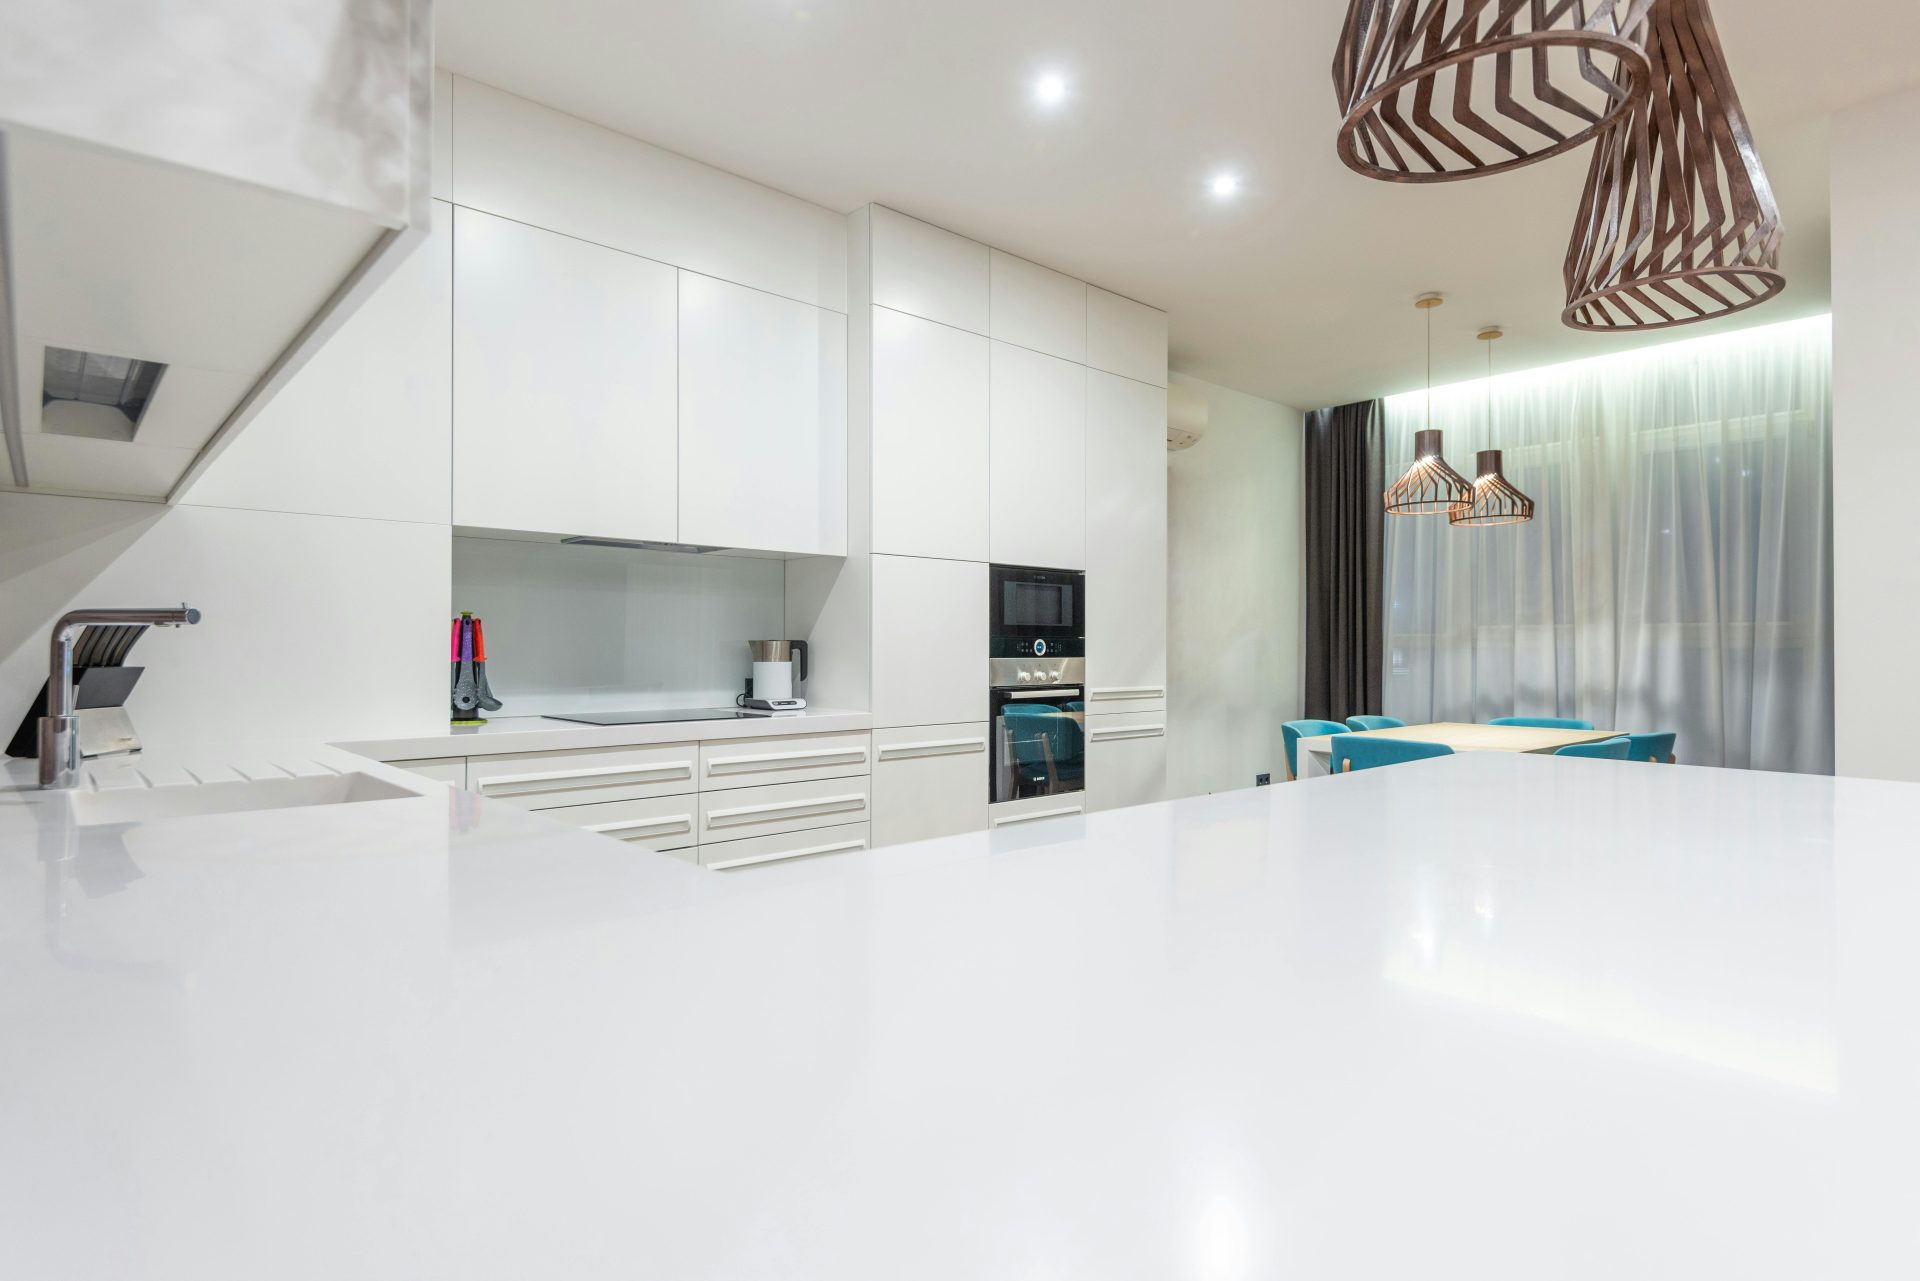 Installation Tips and Considerations for Kitchen Lighting